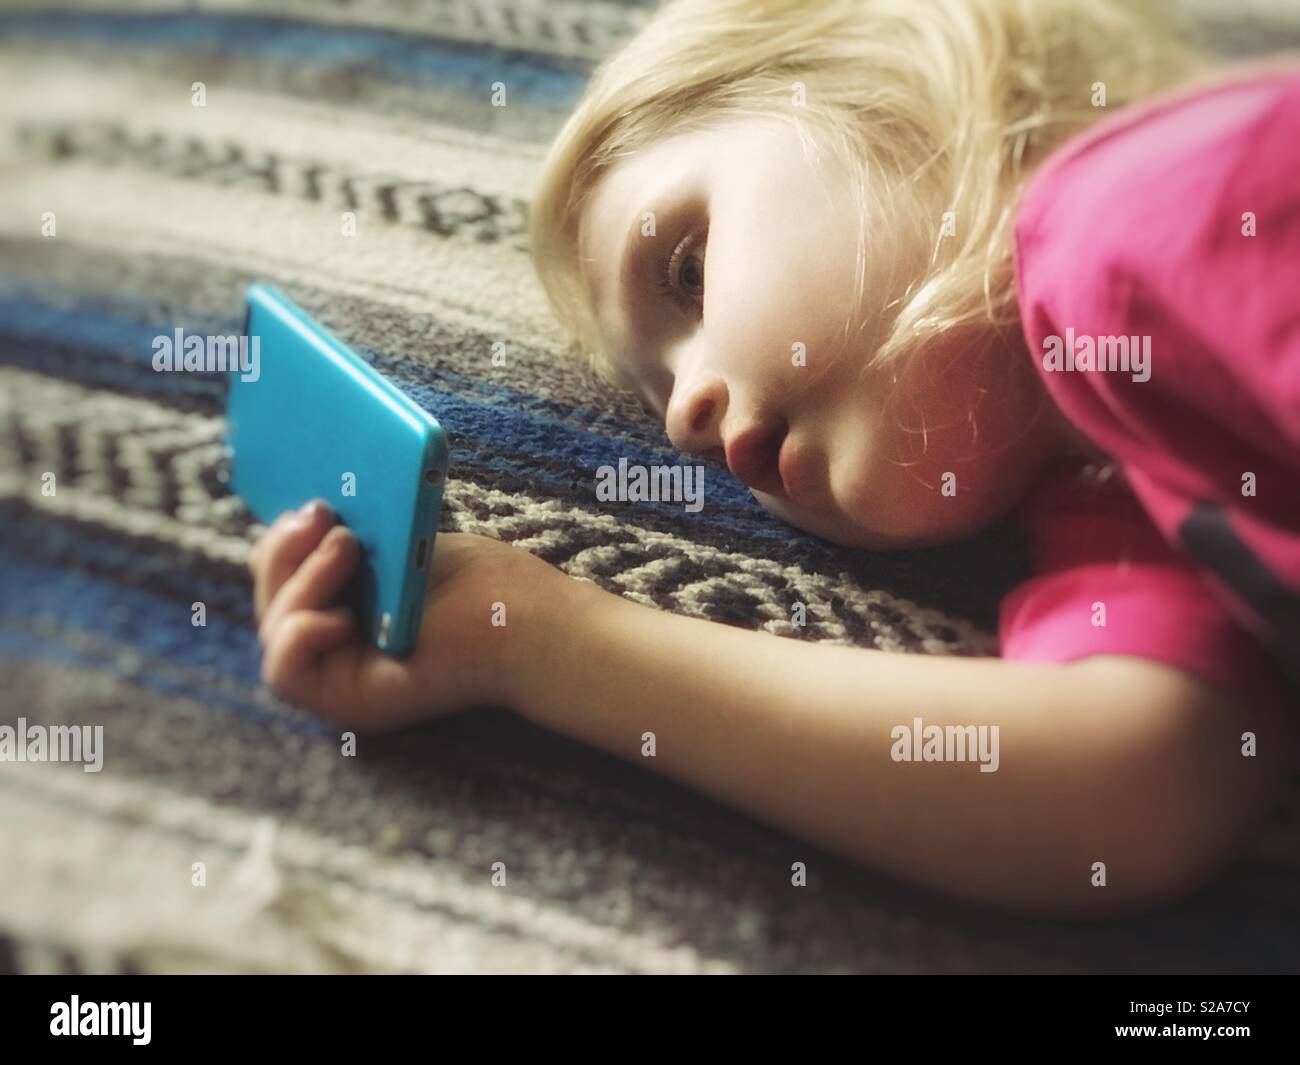 Four year old girl looking at a mobile device Stock Photo